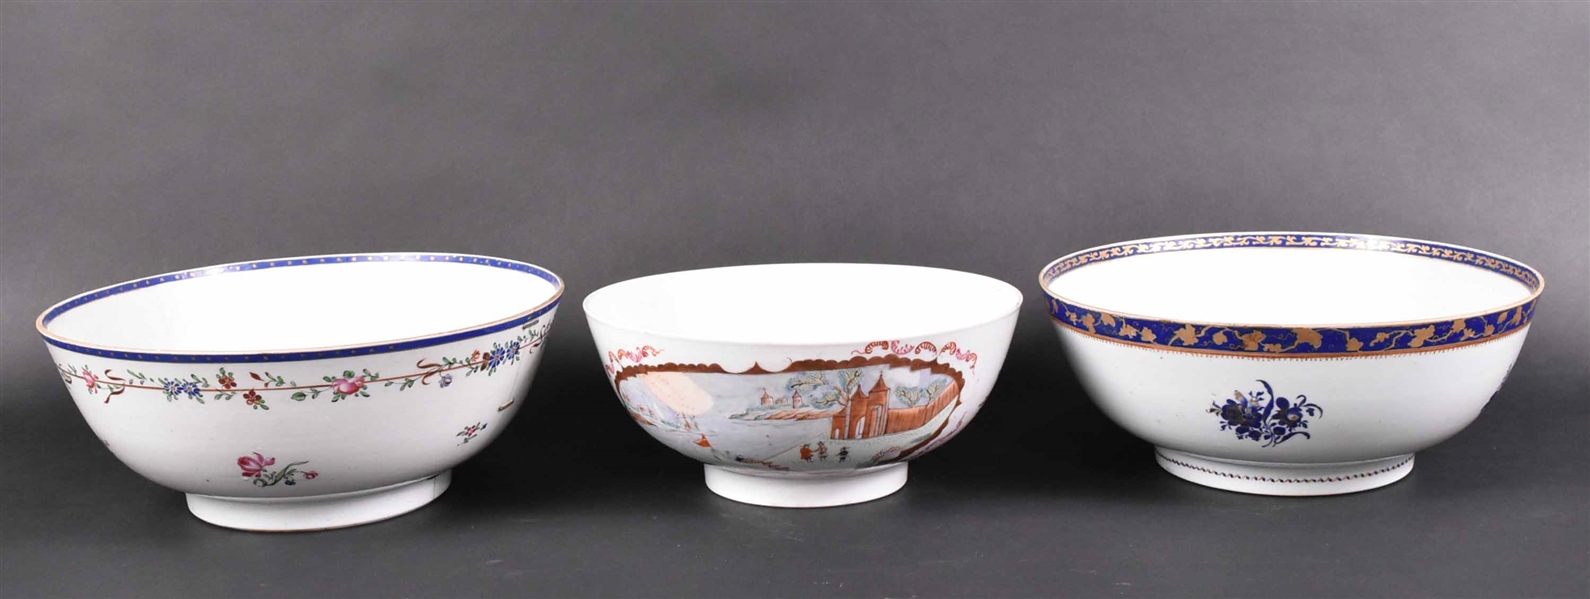 Three Chinese Export Porcelain Bowls